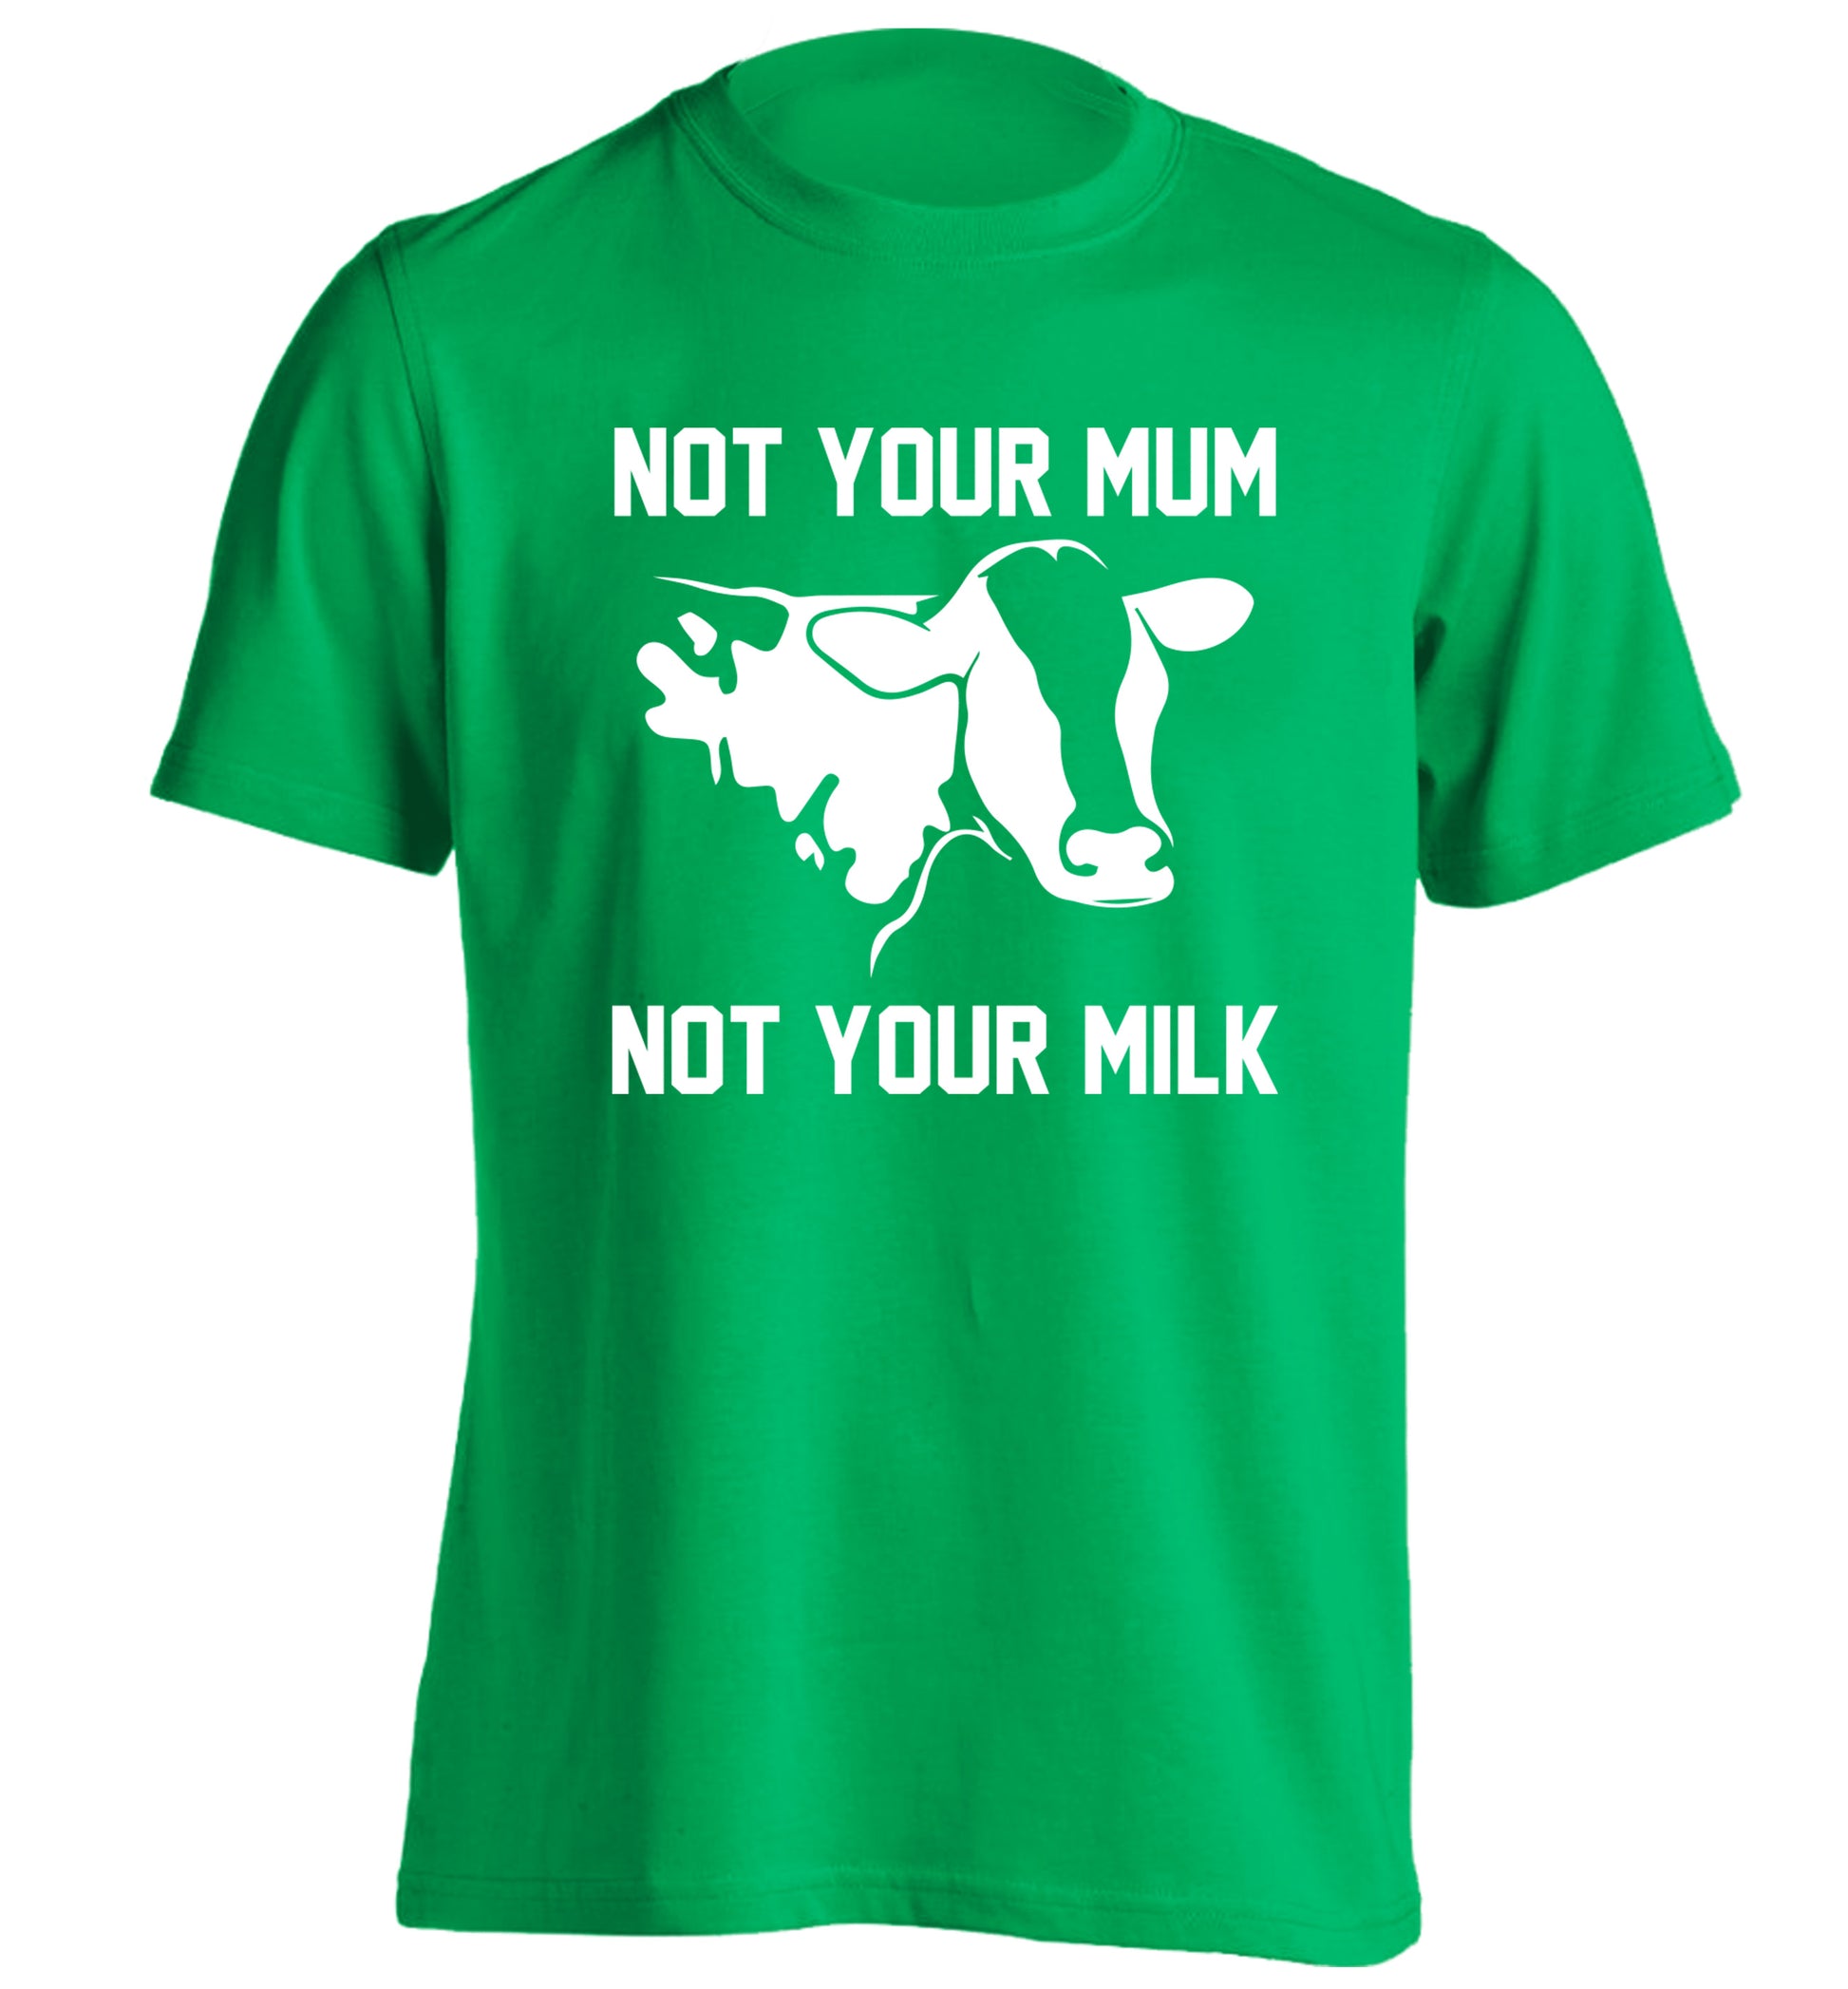 Not your mum not your milk adults unisex green Tshirt 2XL